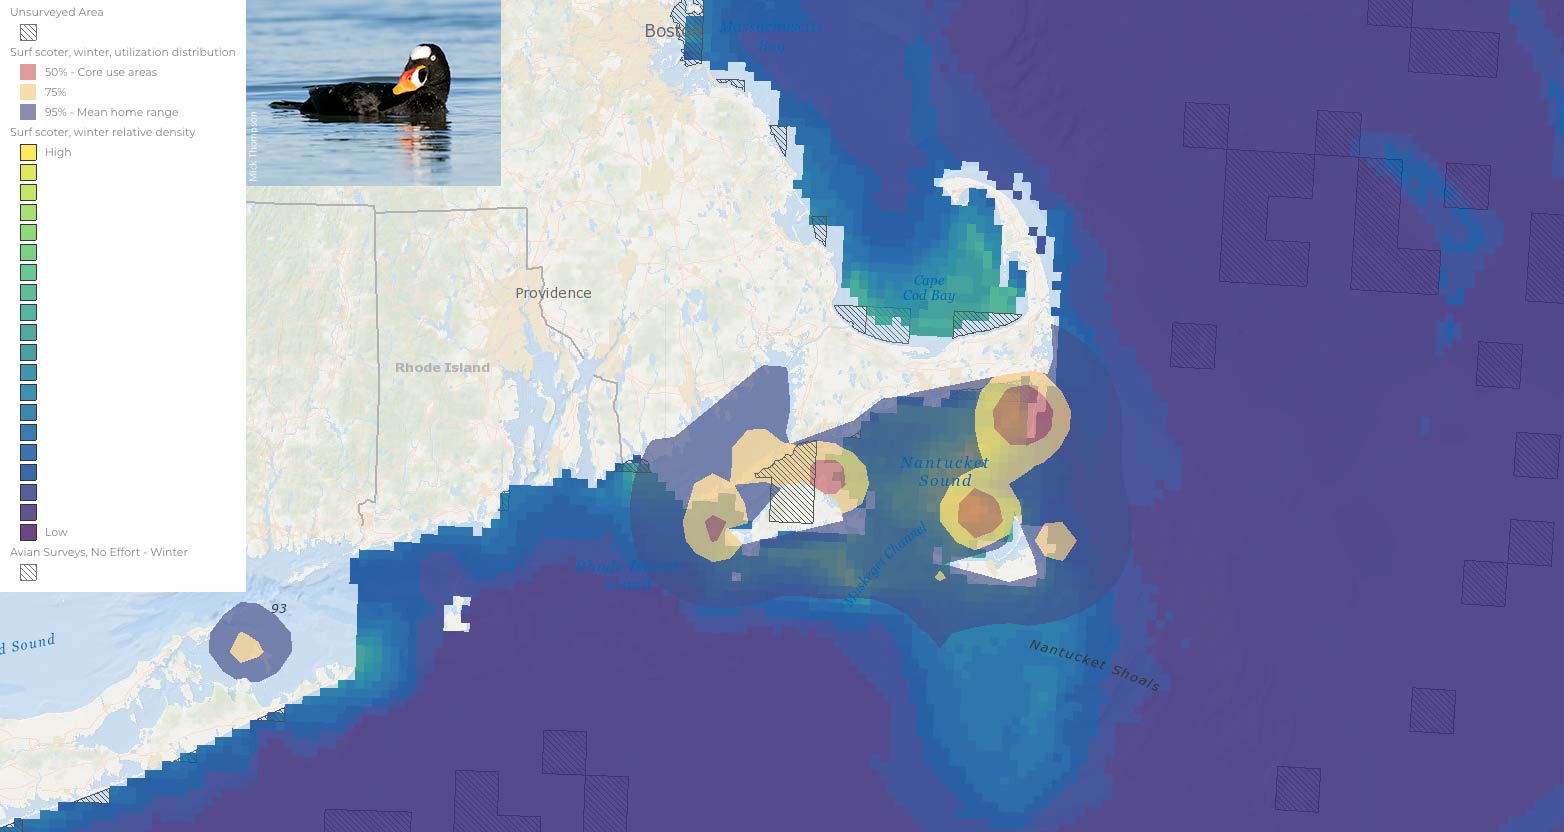 Surf scoter map with MDAT data